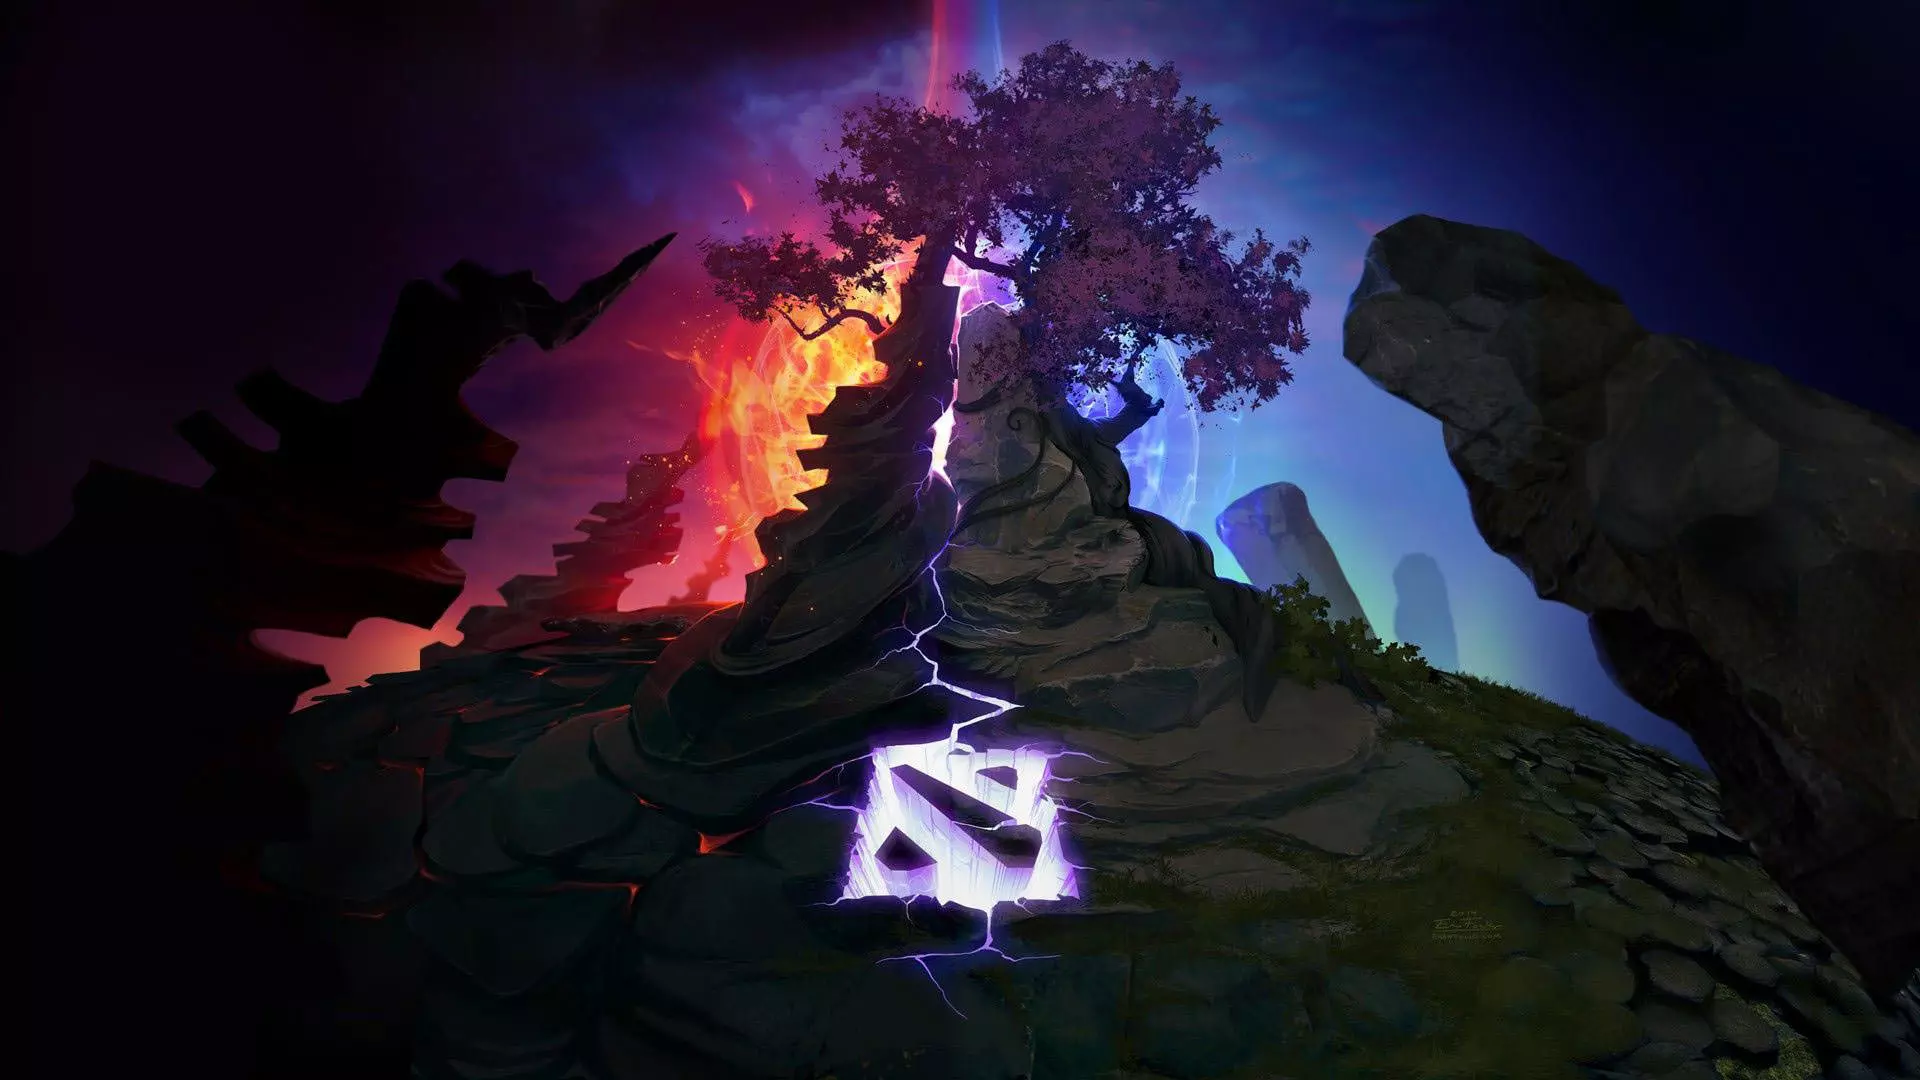 Battle of Good and Evil and the Dota 2 game logo